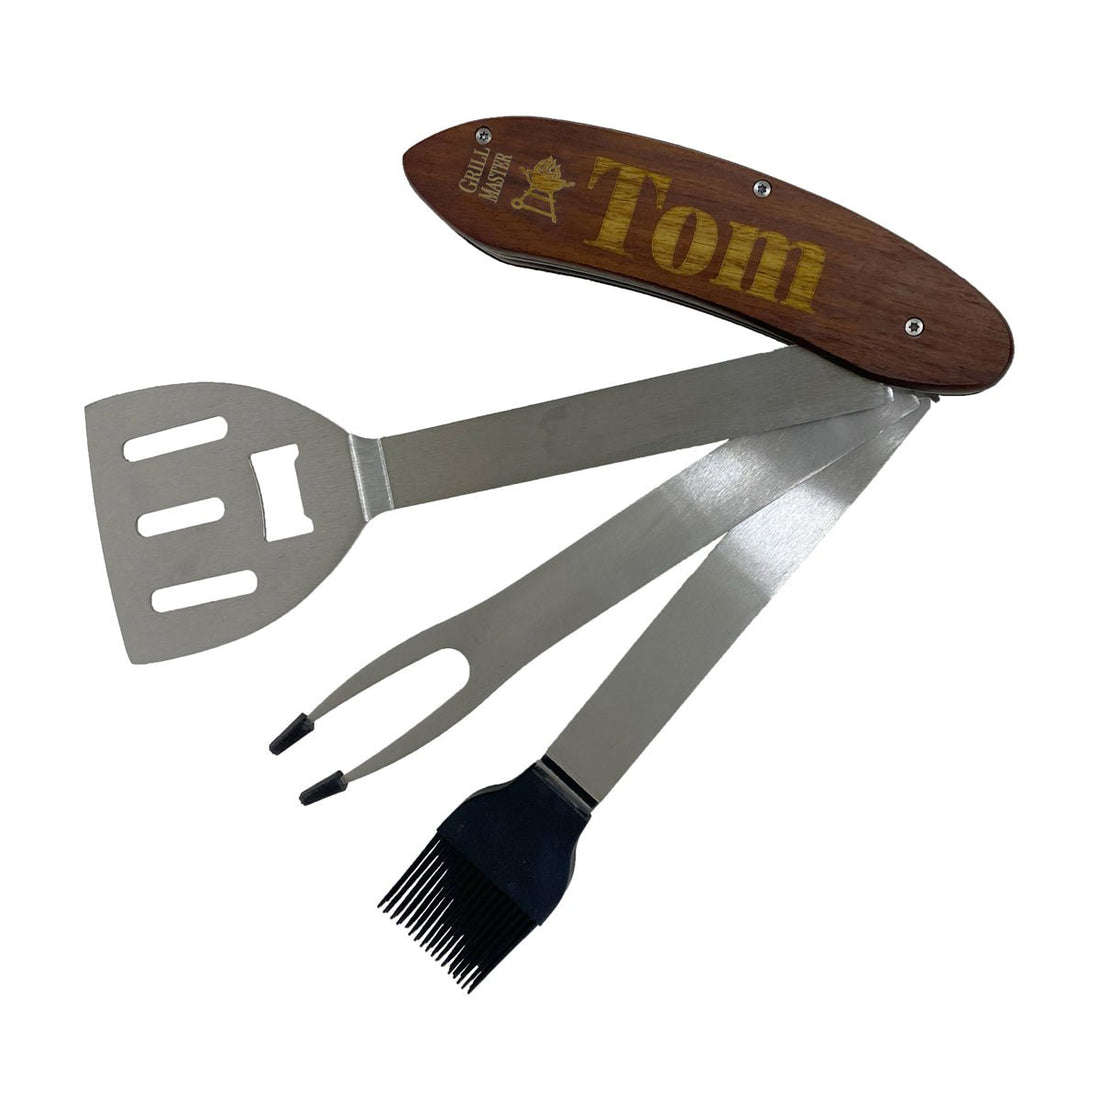 5-in-1 Multi Tool Barbecue Foldable Tool Kit - Laser Engraved or UV Printed - ATOM Promotions